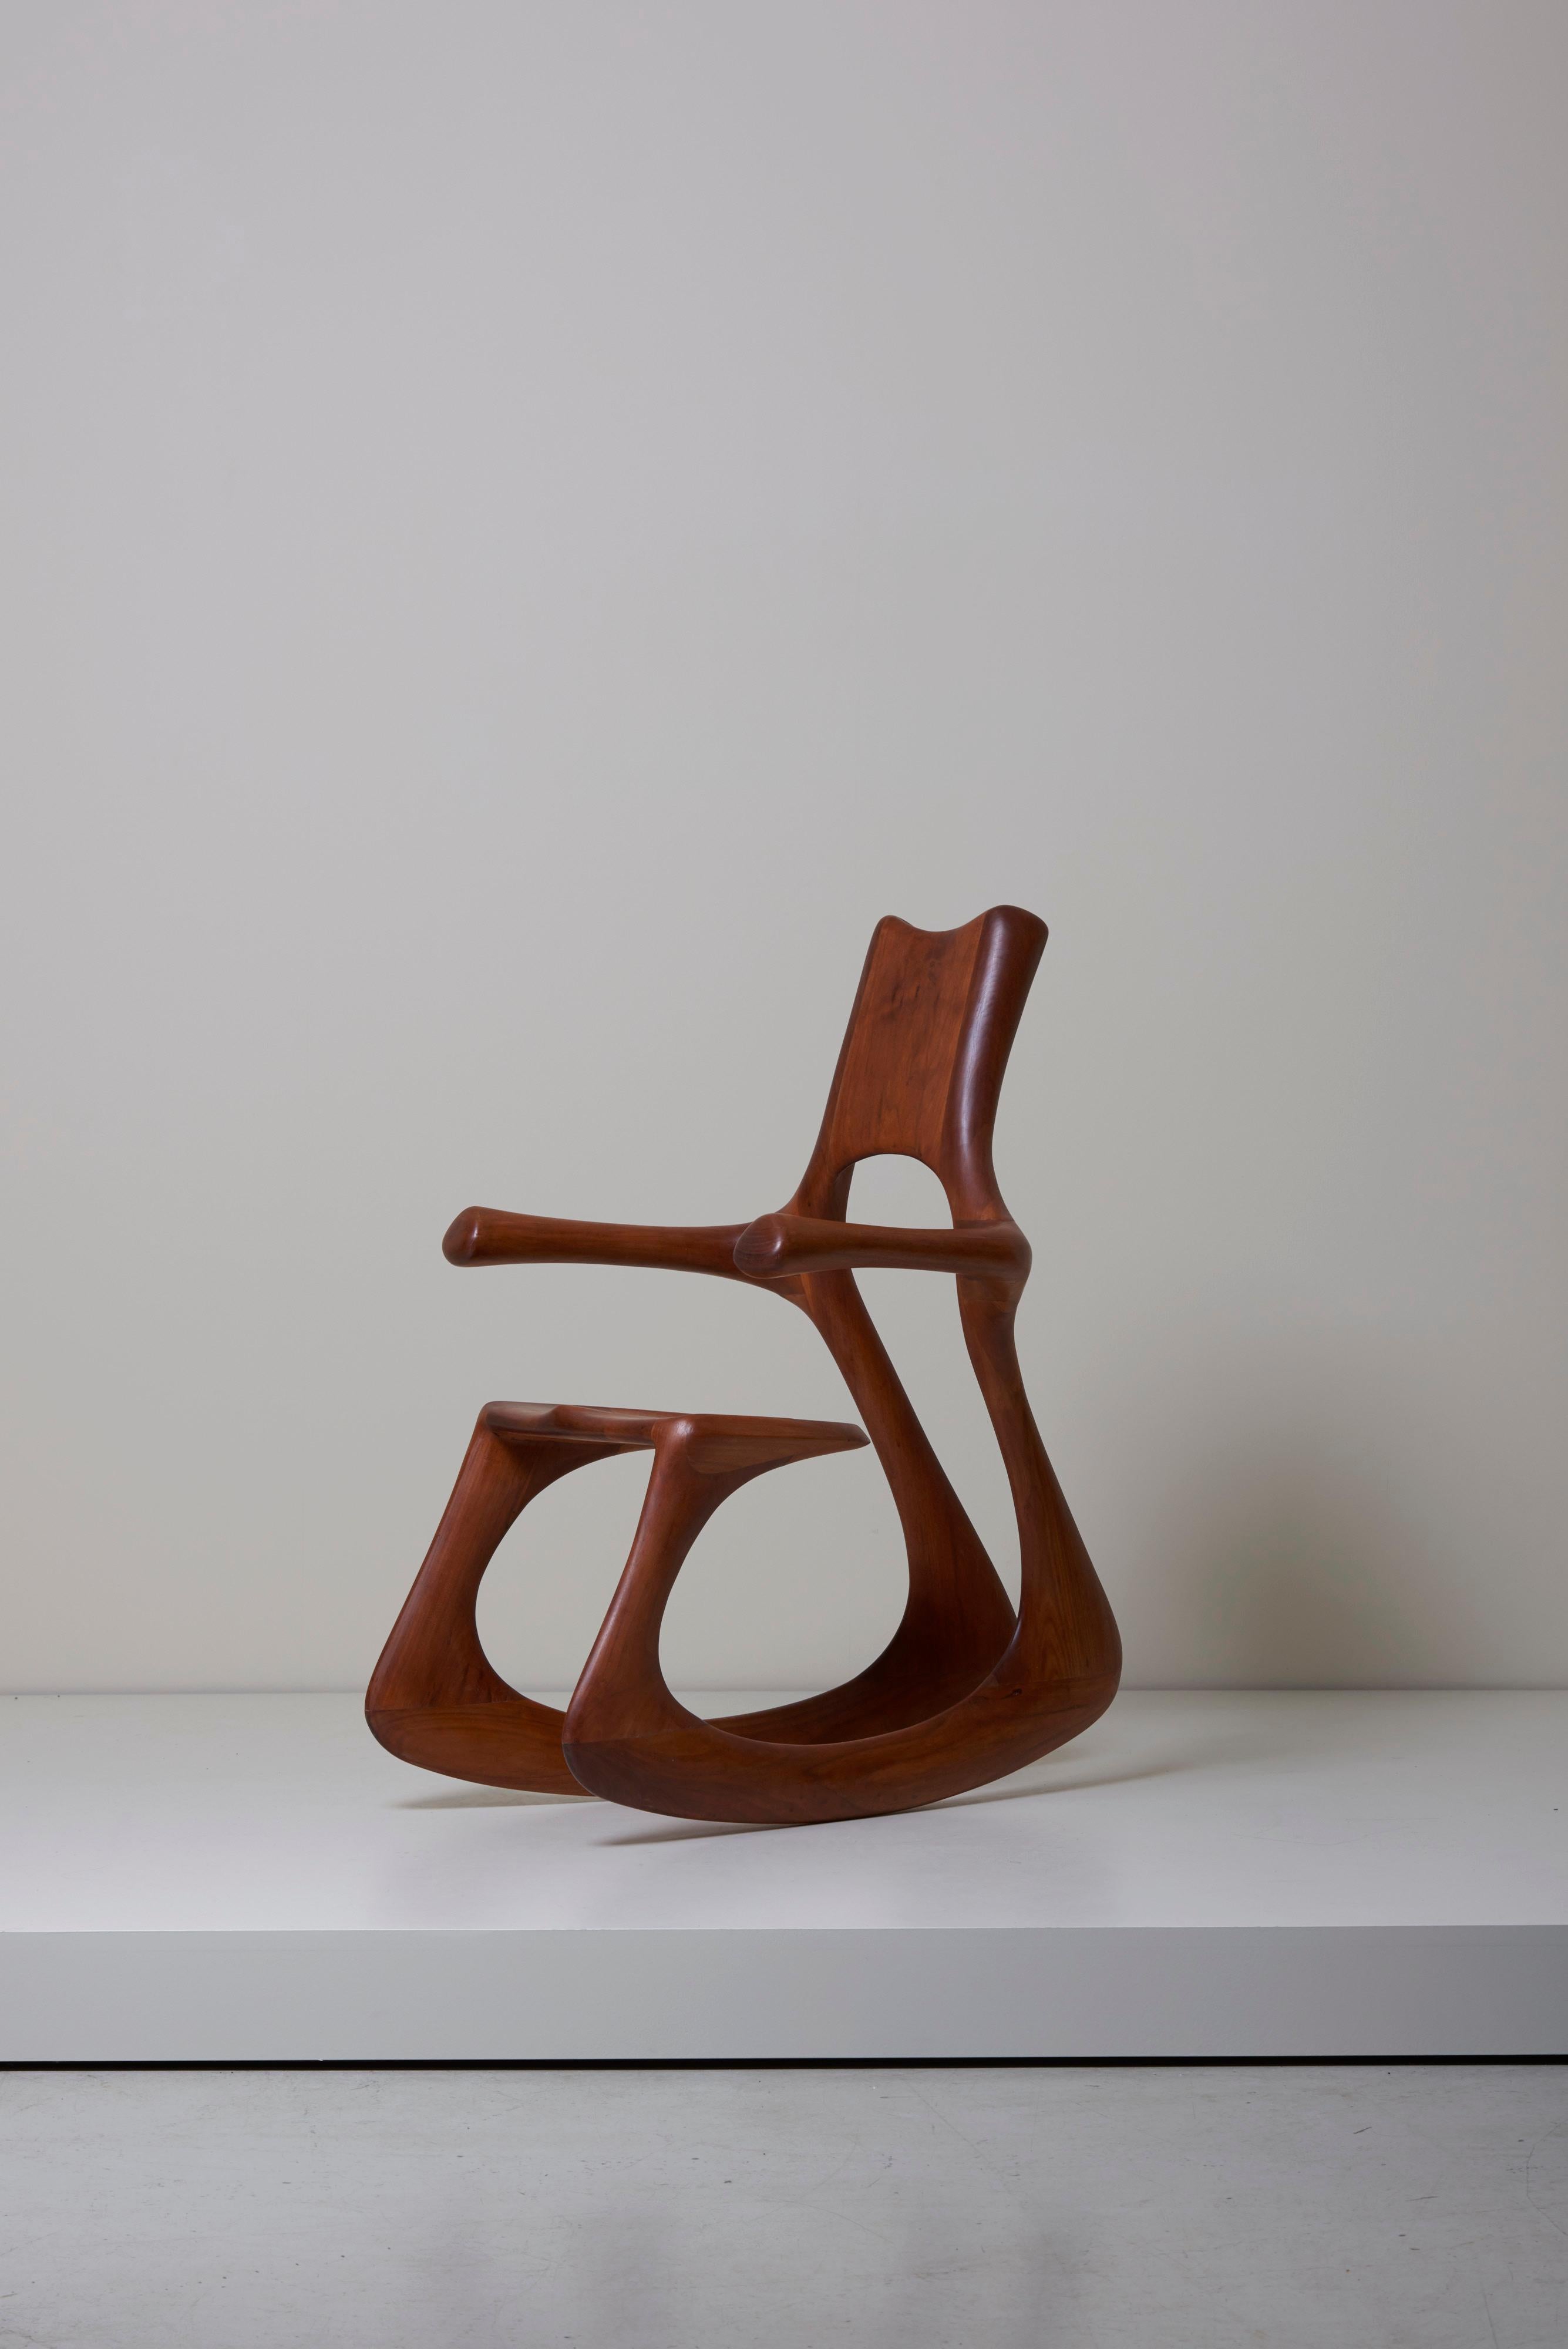 Rare Bennet Sykes studio rocking chair in restored condition.
An absolute sculptural high end collectors studio piece. Signed!

